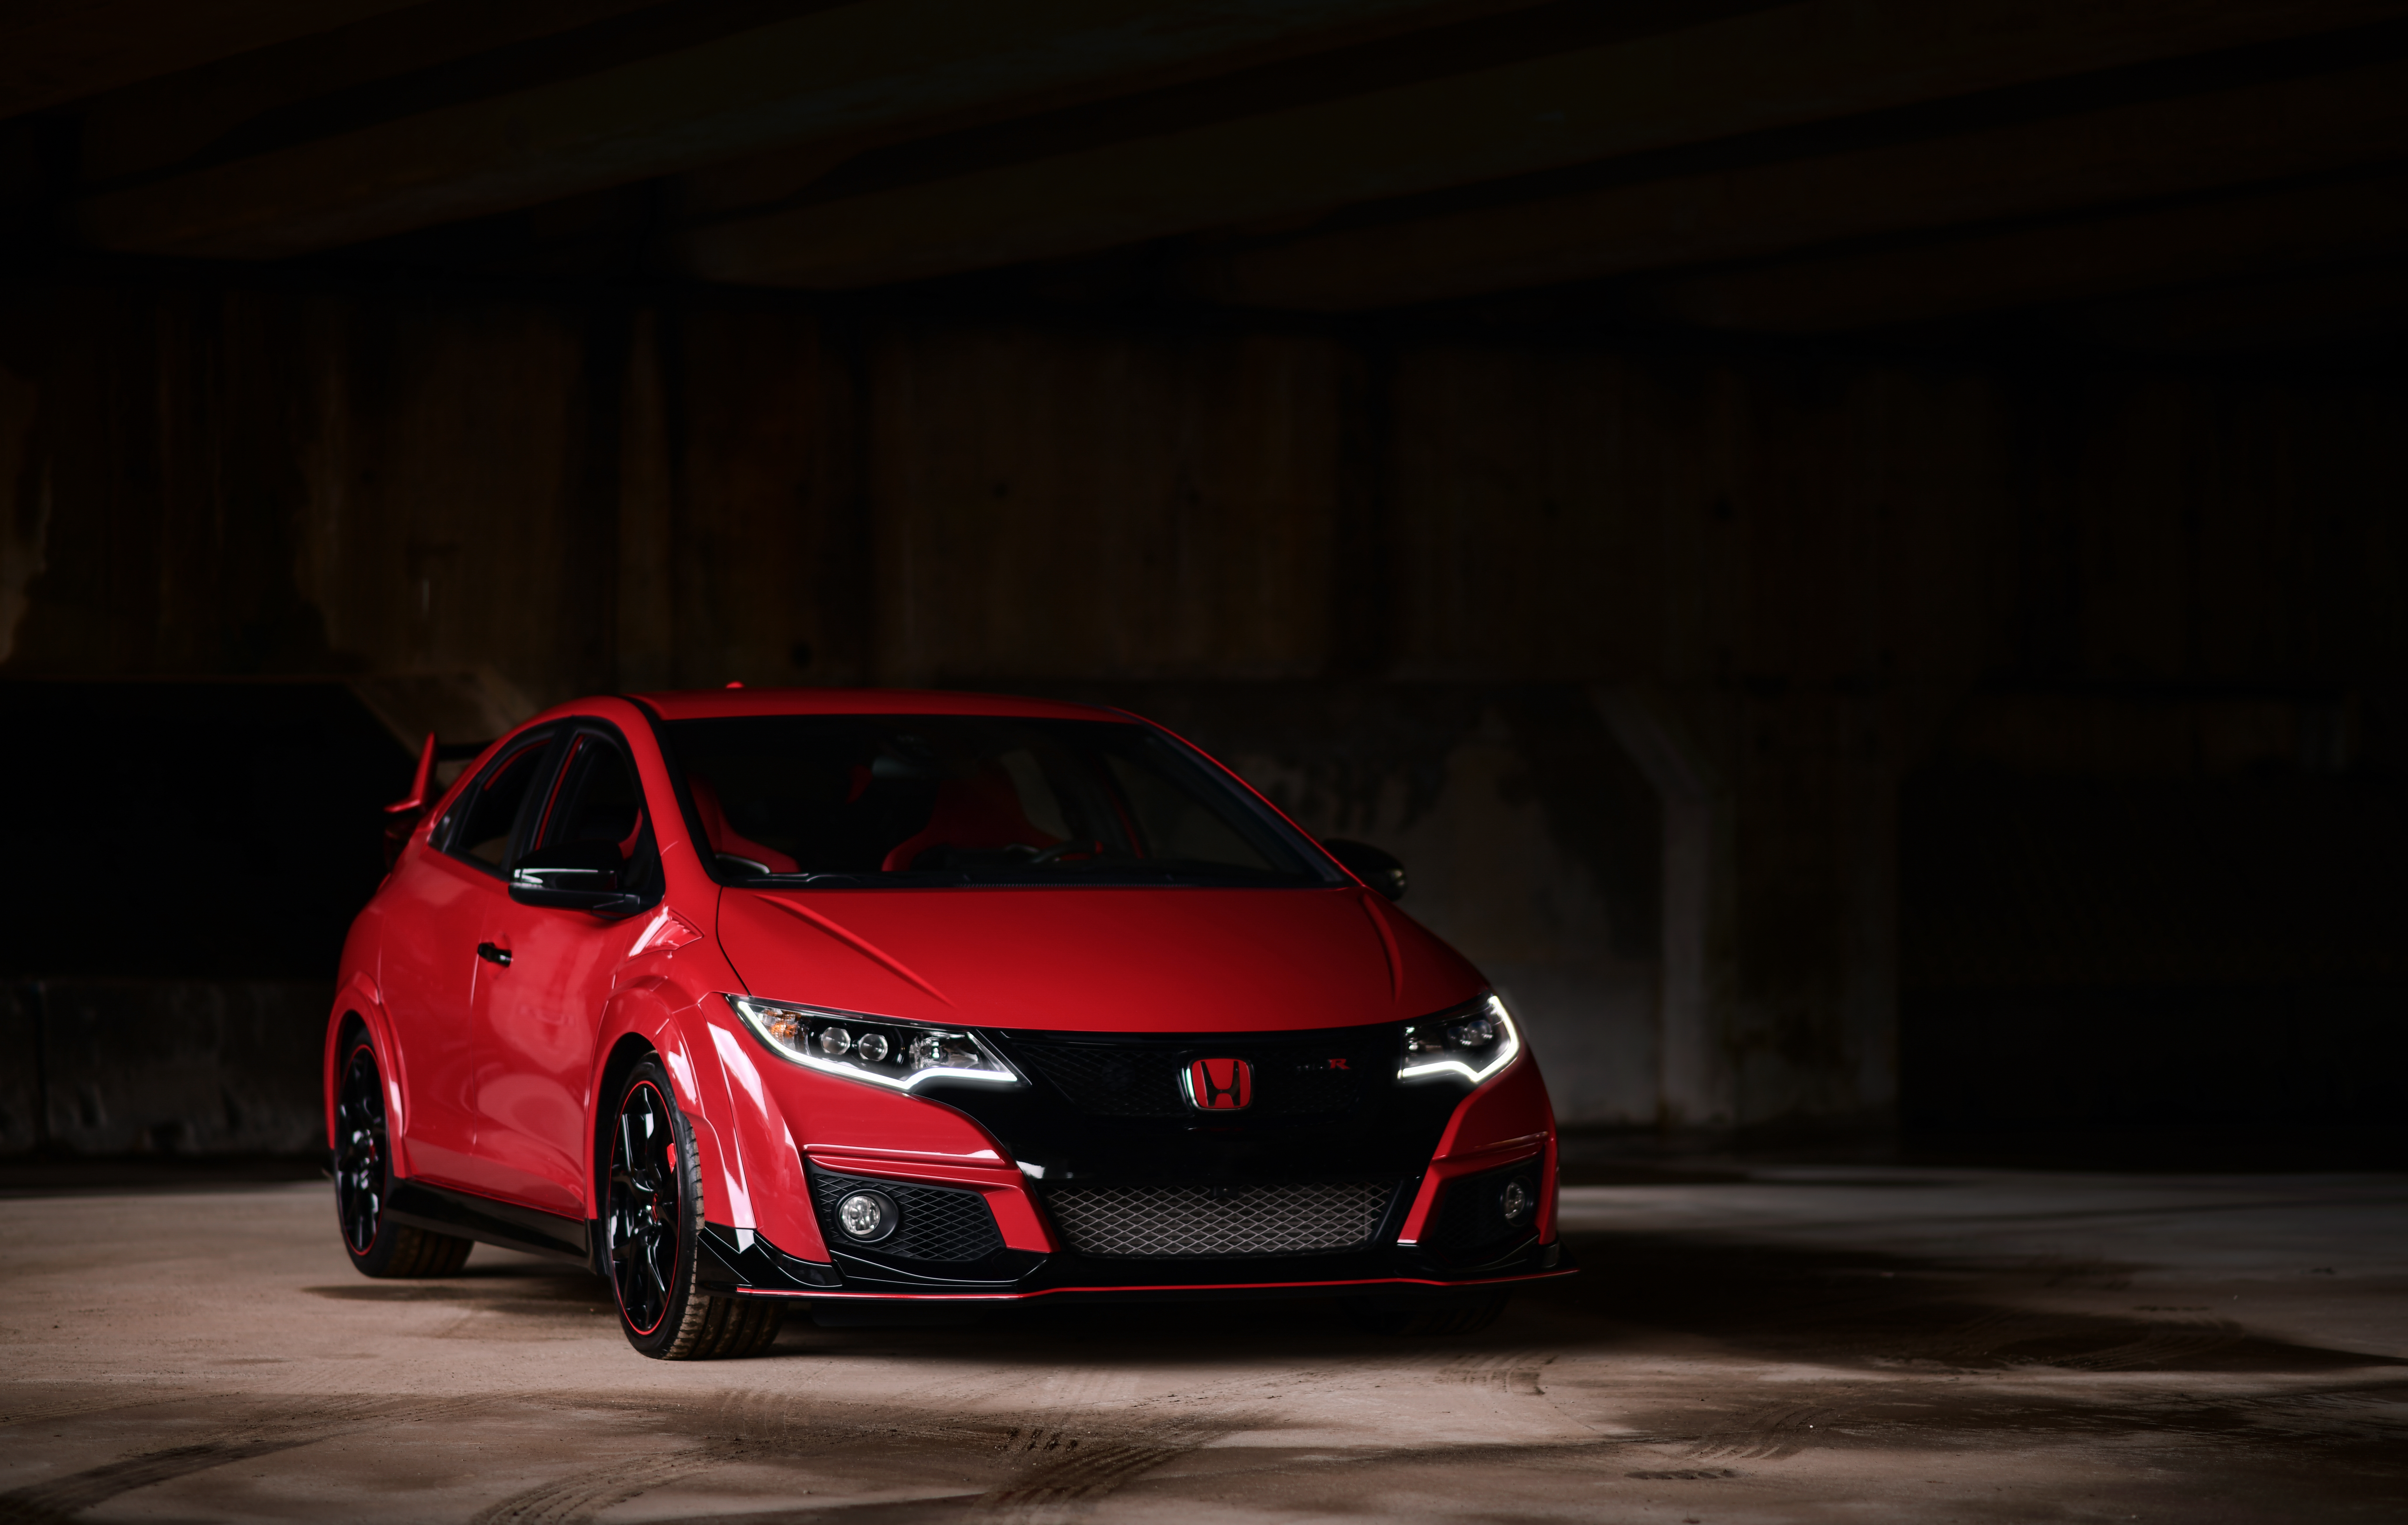 143393 Screensavers and Wallpapers Honda for phone. Download honda, cars, red, dark, car, front view, machine, parking, honda fk2 pictures for free